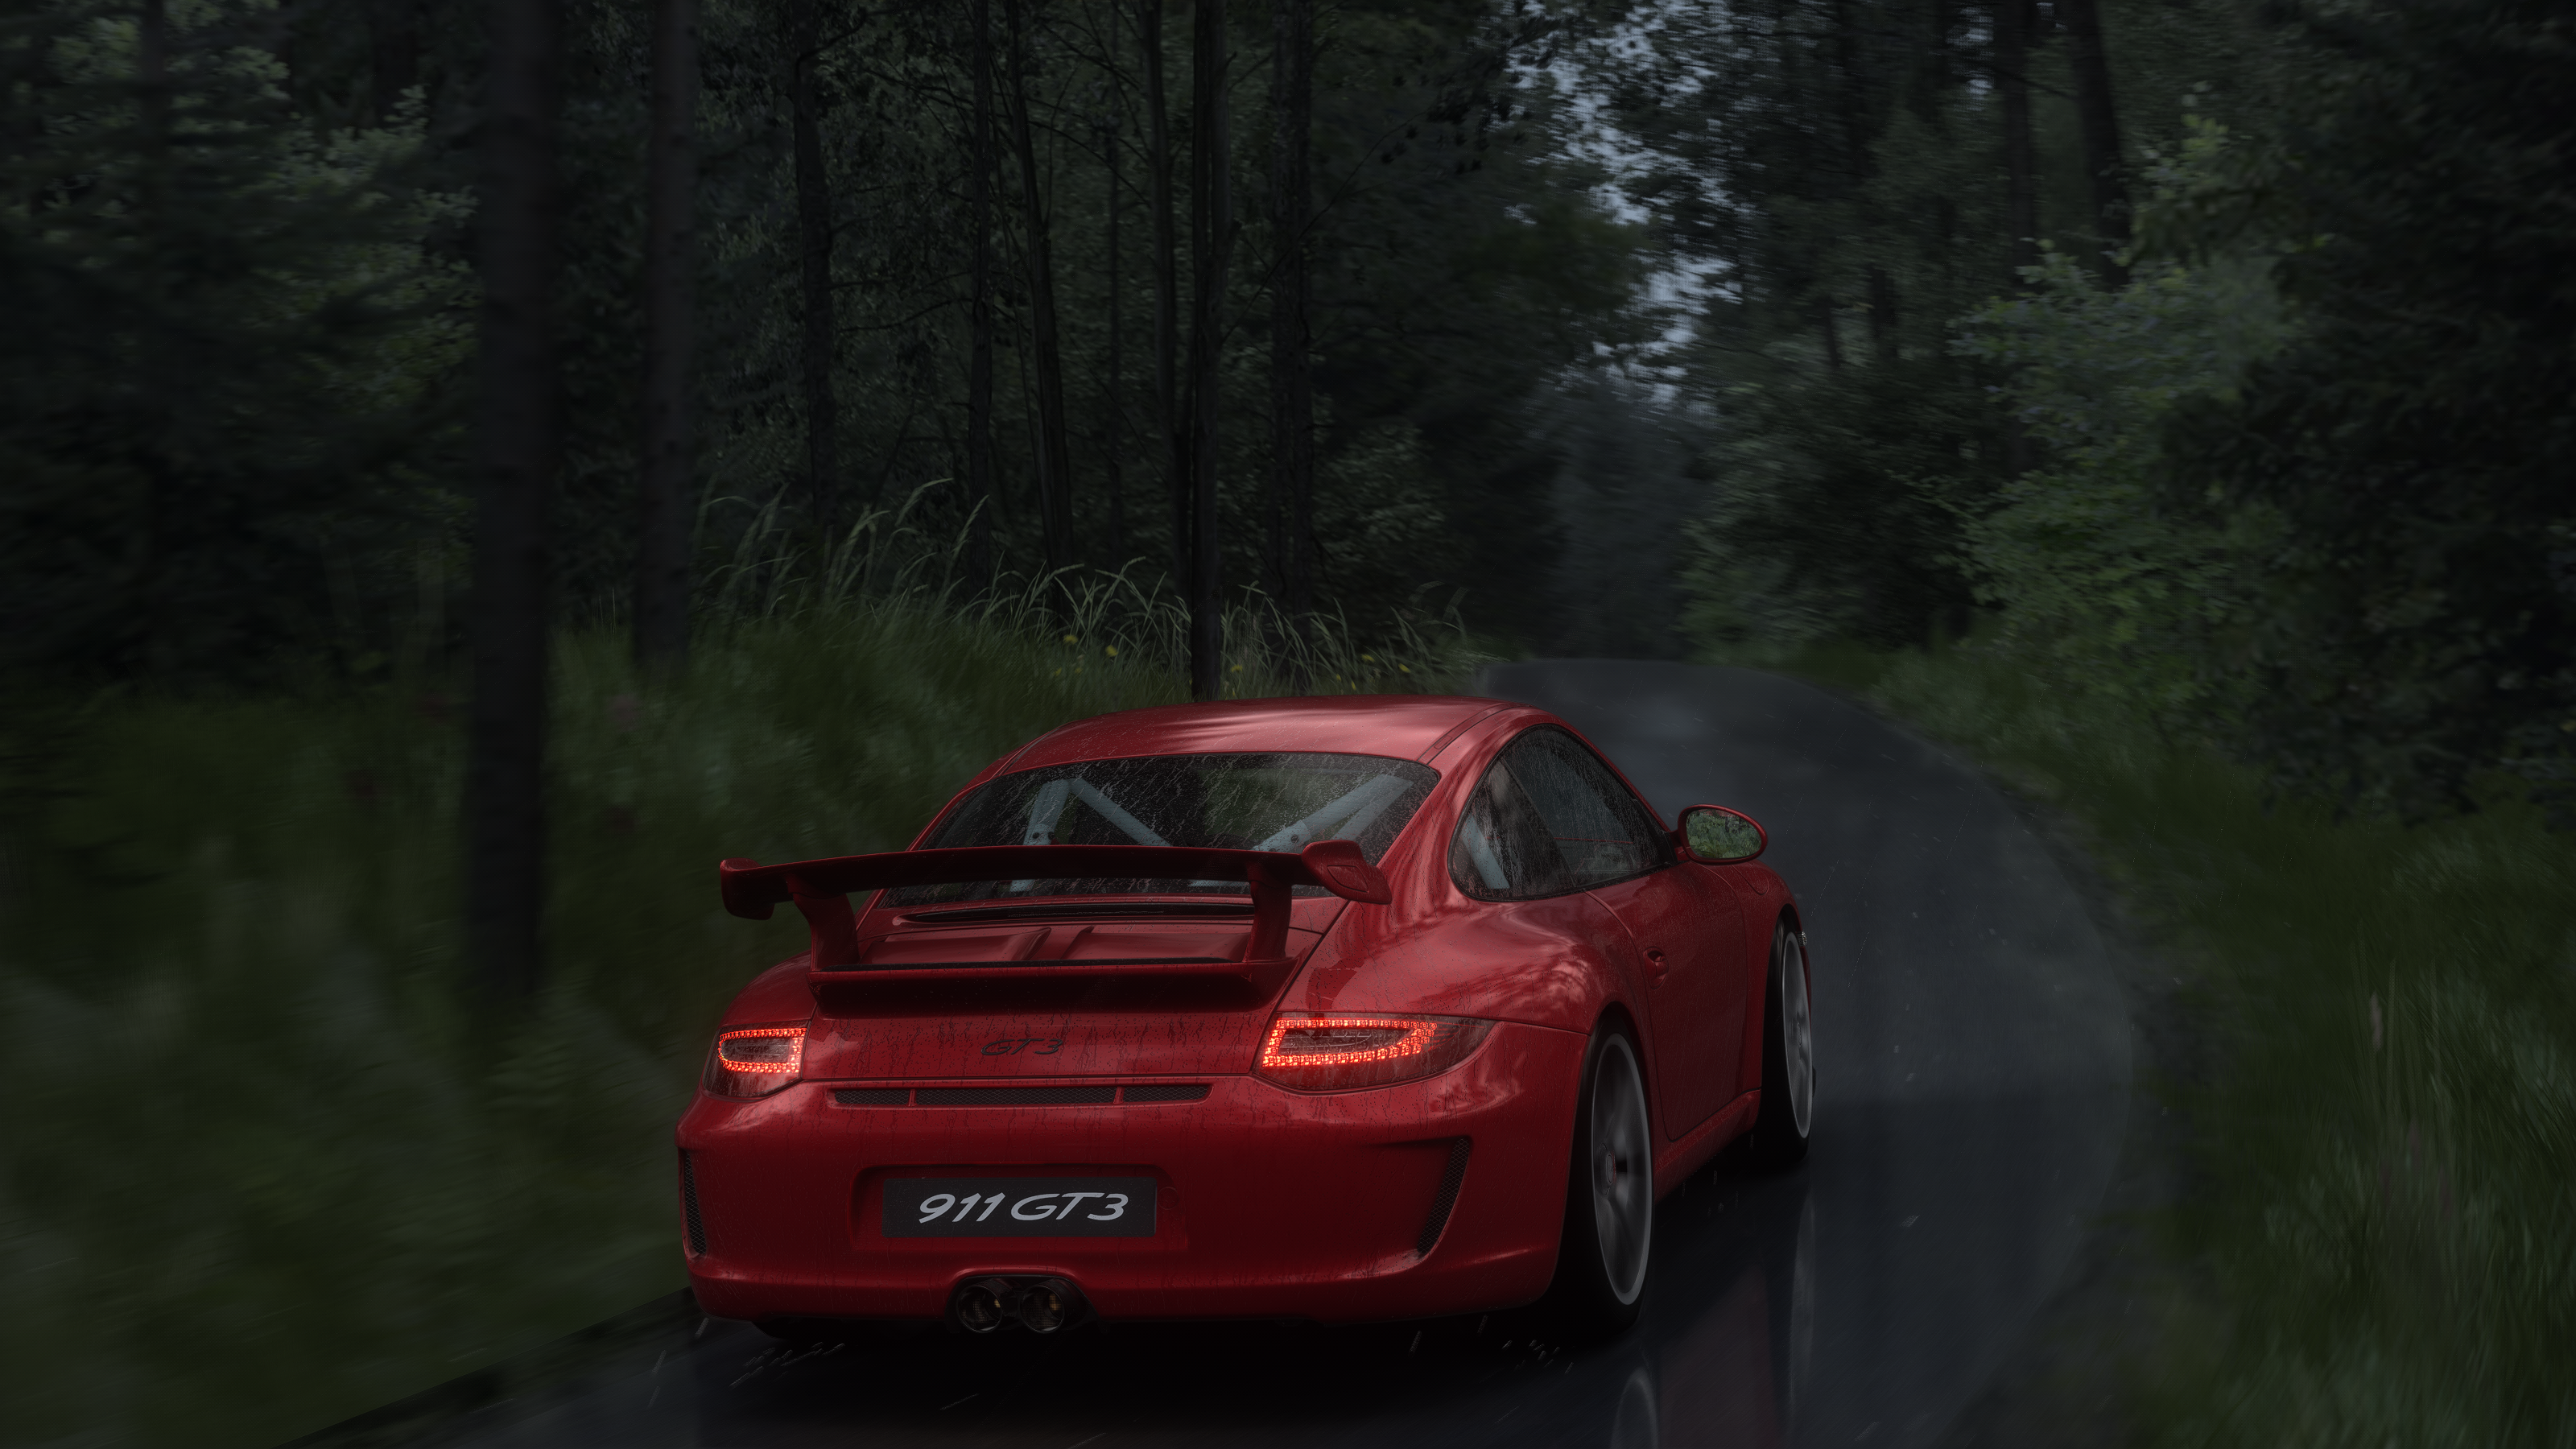 General 3200x1800 Assetto Corsa Porsche GT3 997.2 trees overcast rain car video game art realistic 4K gaming video games screen shot rear view taillights licence plates reflection red cars path rearview mirror